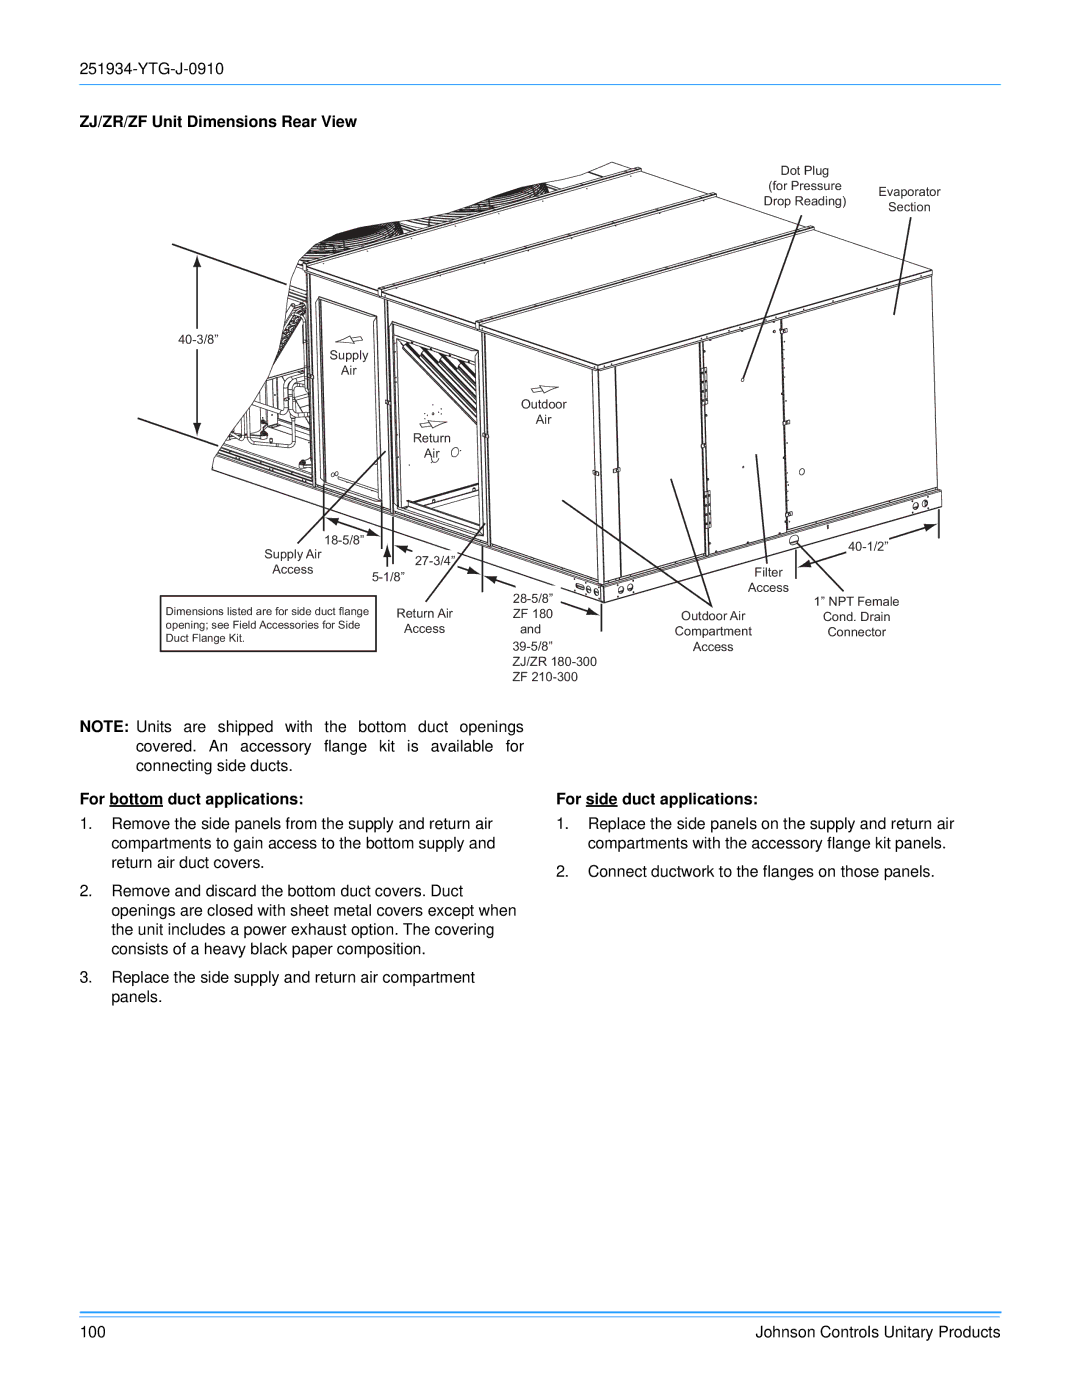 York 251934-YTG-J-0910 manual ZJ/ZR/ZF Unit Dimensions Rear View, For bottom duct applications, For side duct applications 